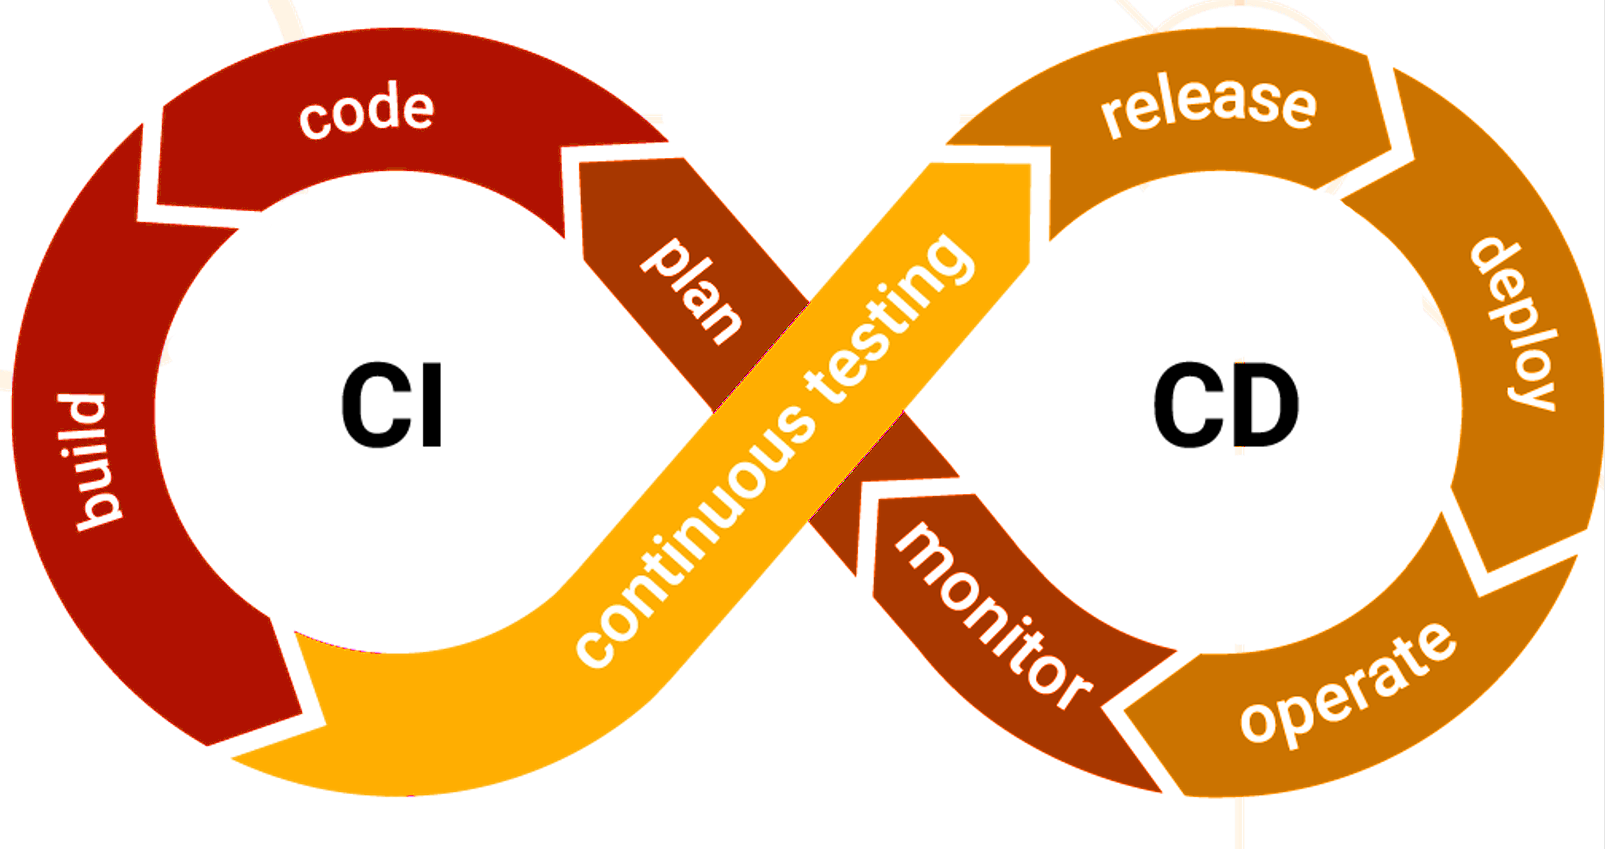 Continuous integration and delivery